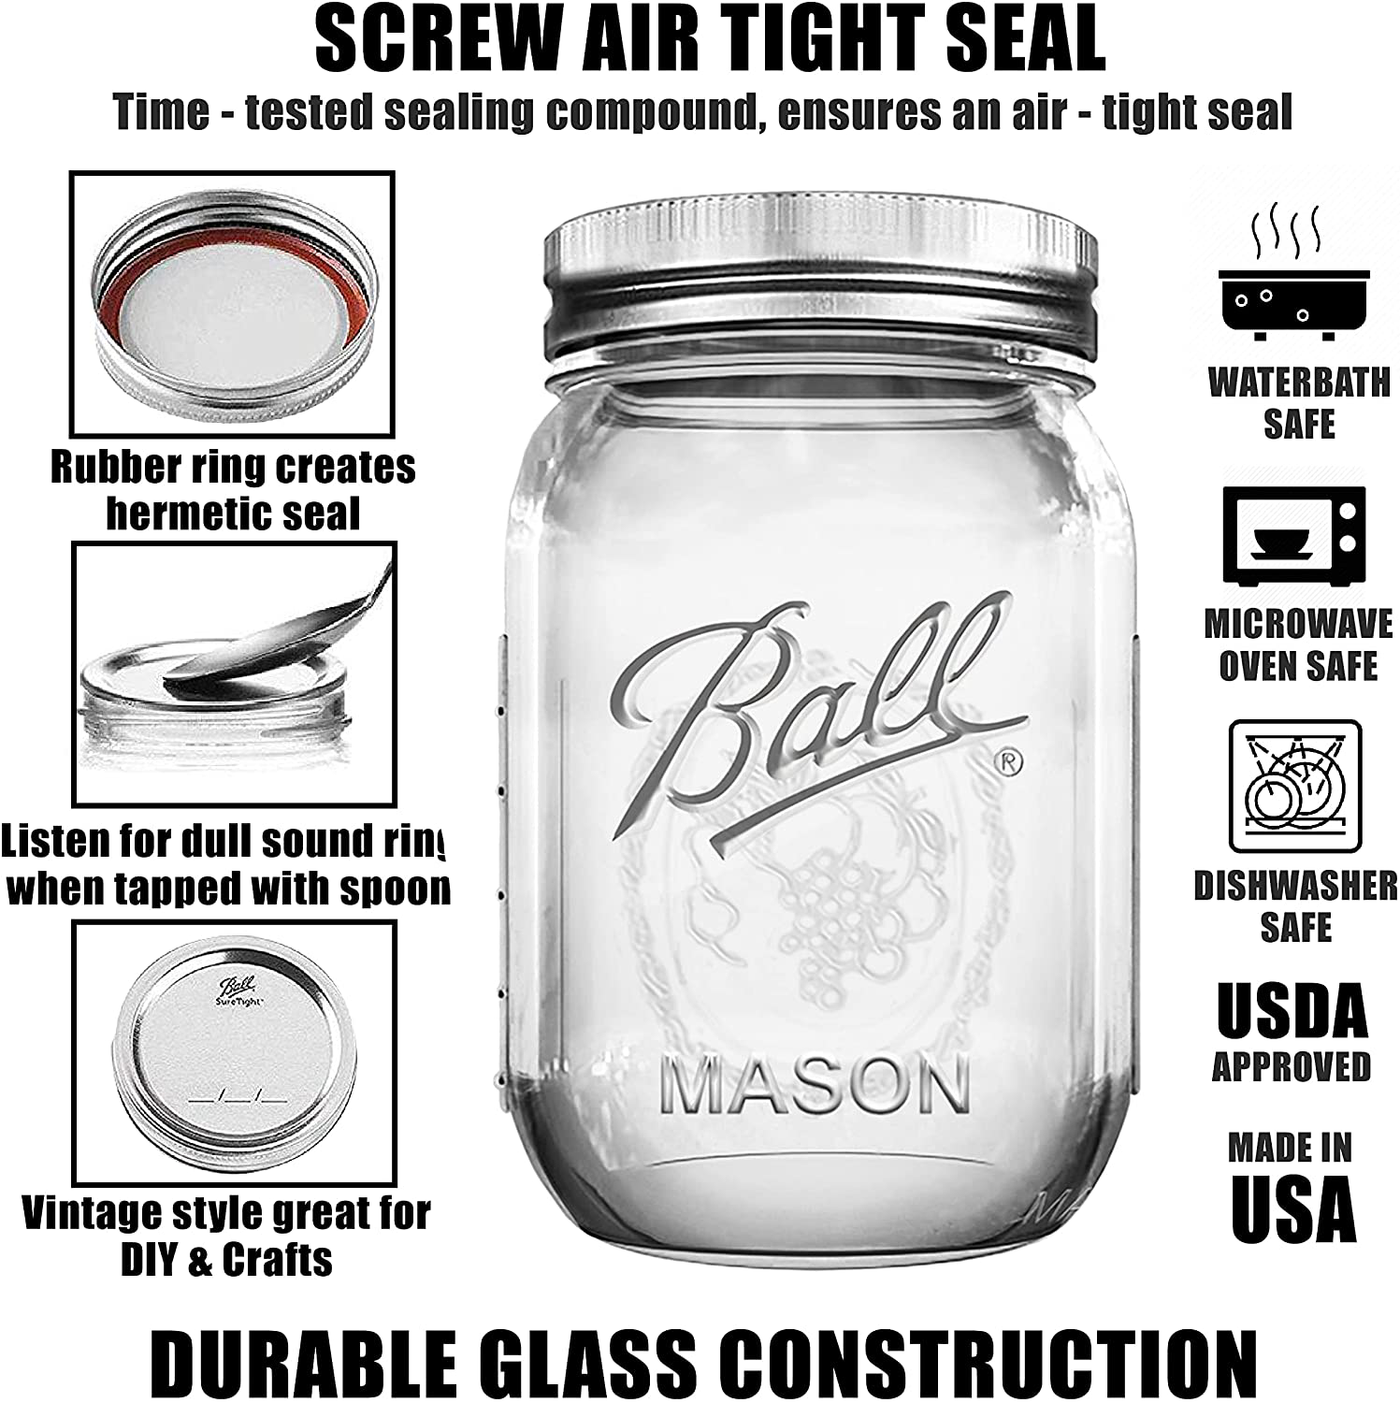 Ball Mason Jars 16 oz Bundle with Non Slip Jar Opener brand BHL Jars Set of 6 - 16 Ounce Size Mason Jars with Regular Mouth - Canning Glass Jars with Lids, Heritage Collection